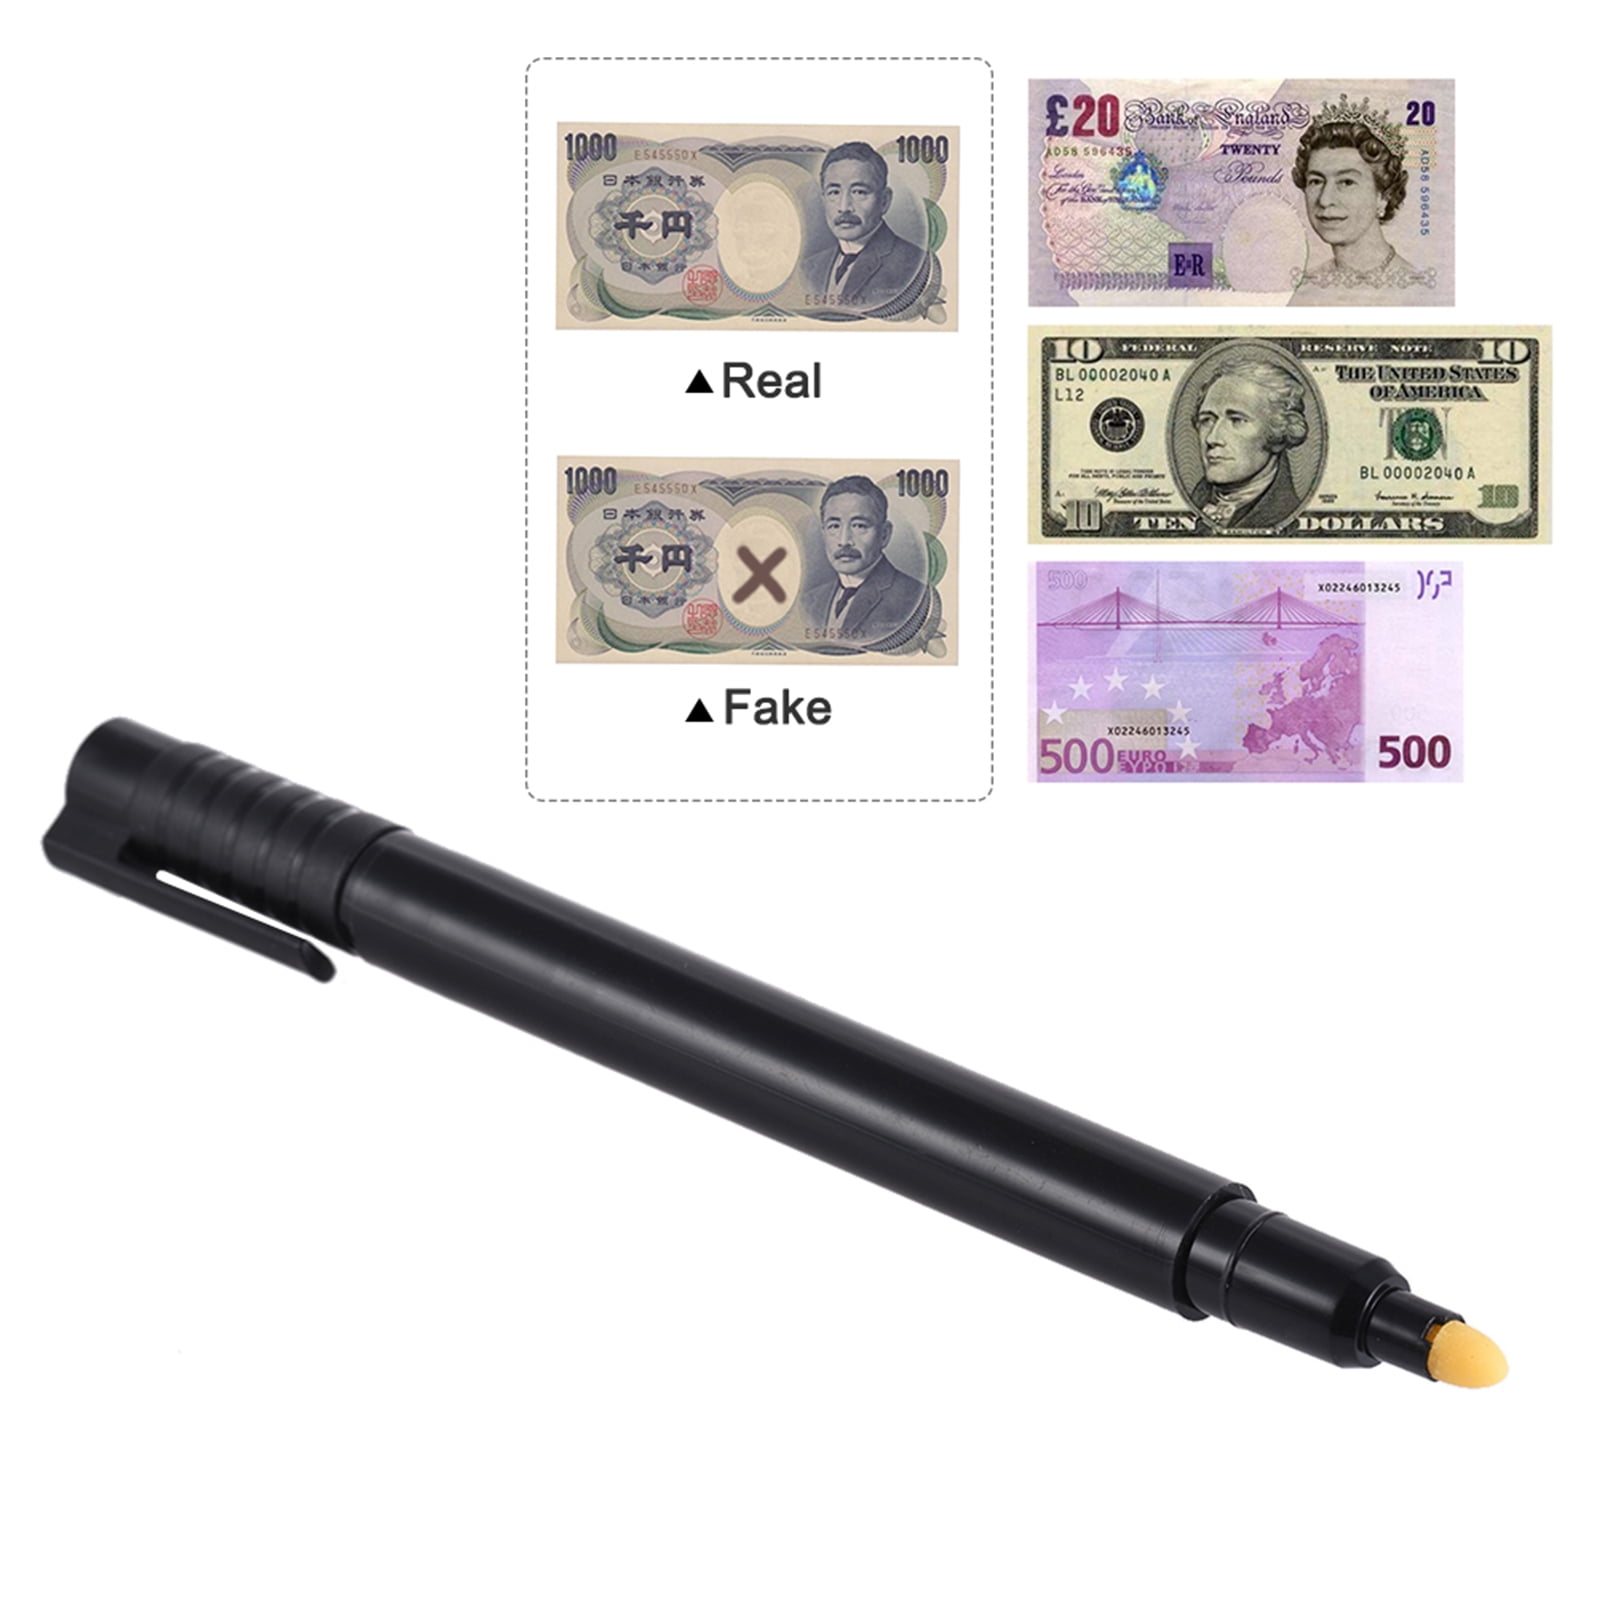 Money Tester Forged Note Detector Pen Fake Note Checker Pen Pk of 5